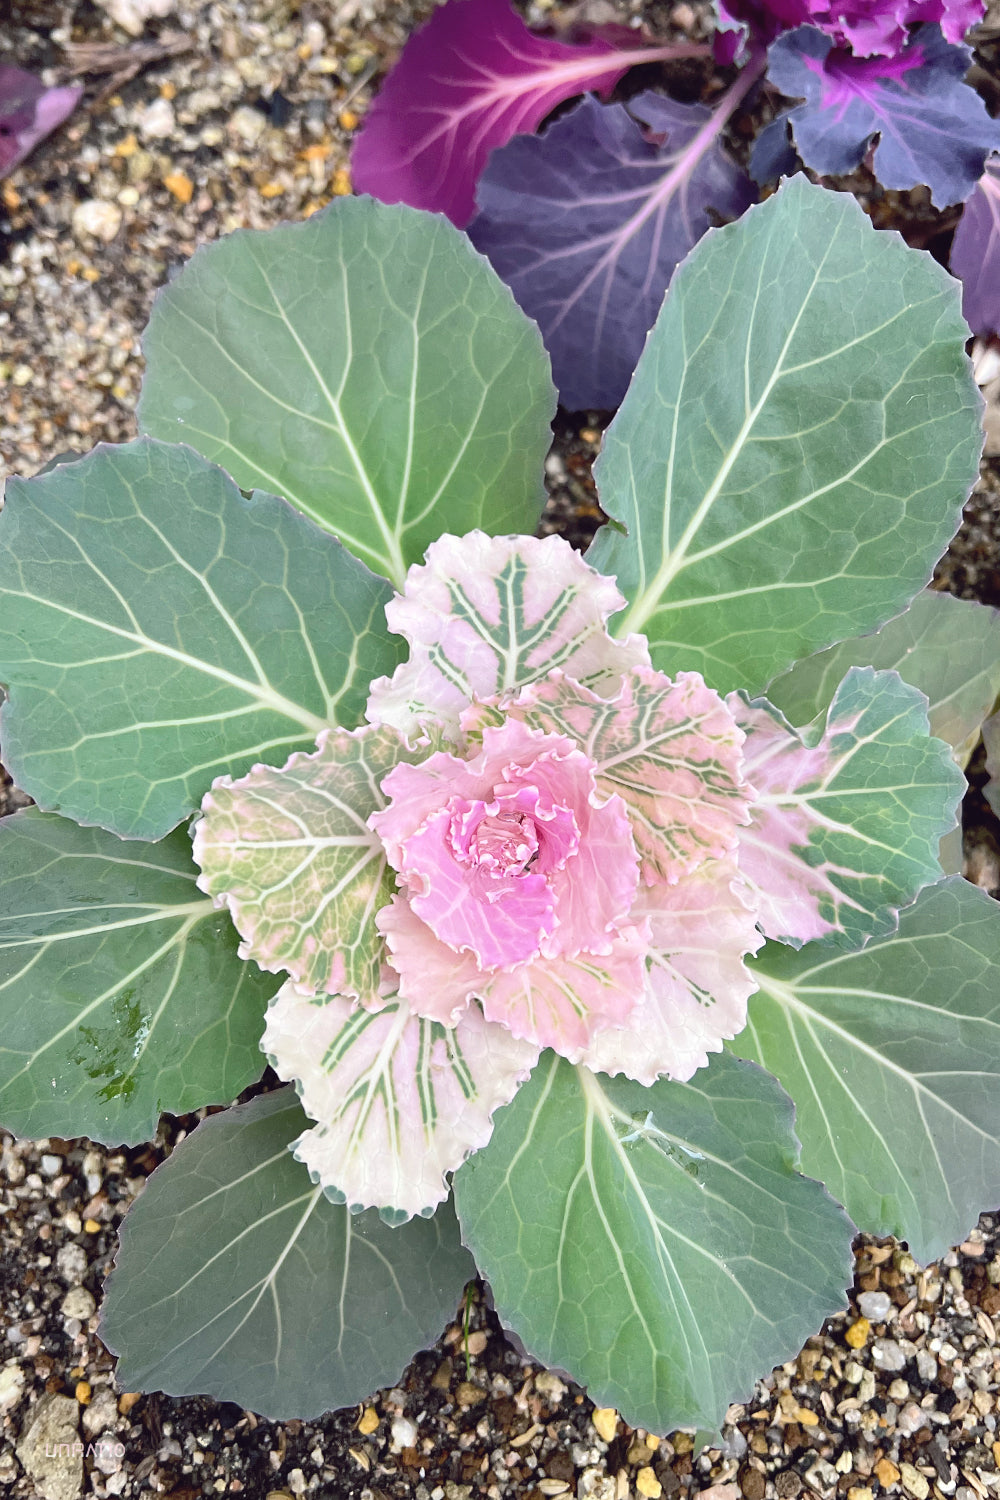 Pink and green ornamental cabbage close-up with delicate rosette center, nestled among other cabbages with purple leaves on gravel soil.